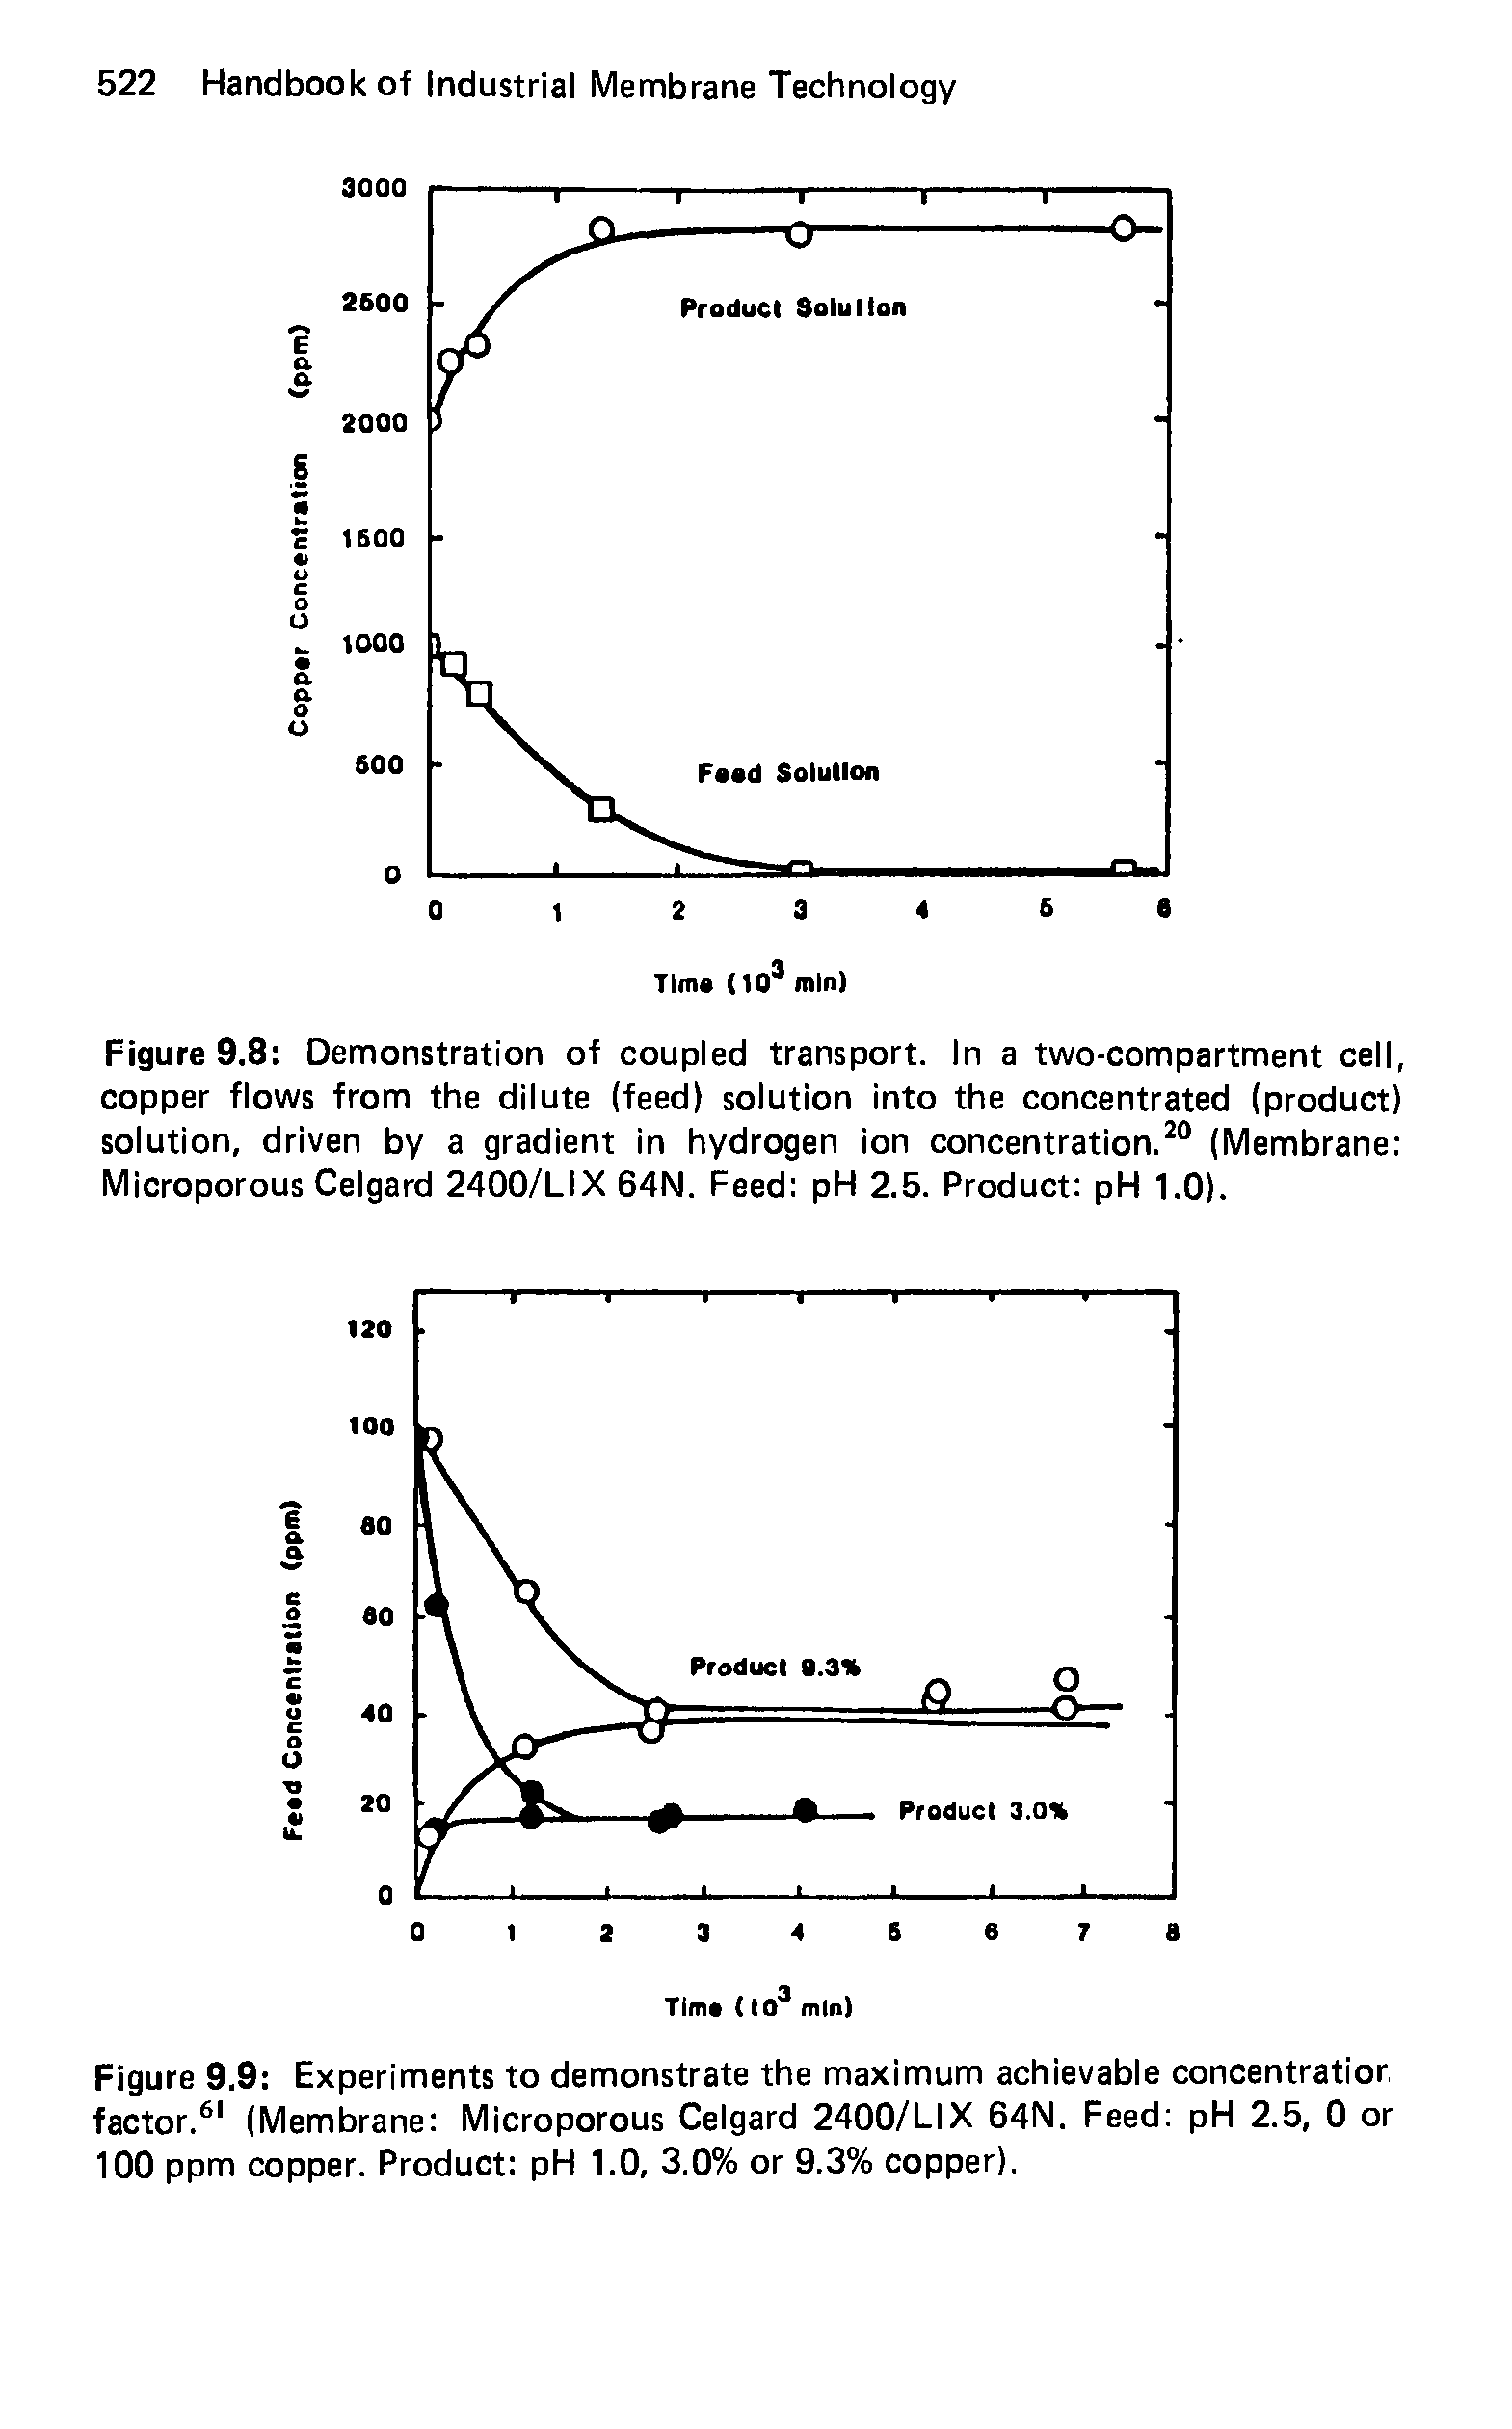 Figure 9.9 Experiments to demonstrate the maximum achievable concentration factor.61 (Membrane Microporous Celgard 2400/LIX 64N. Feed pH 2.5, 0 or 100 ppm copper. Product pH 1.0, 3.0% or 9.3% copper).